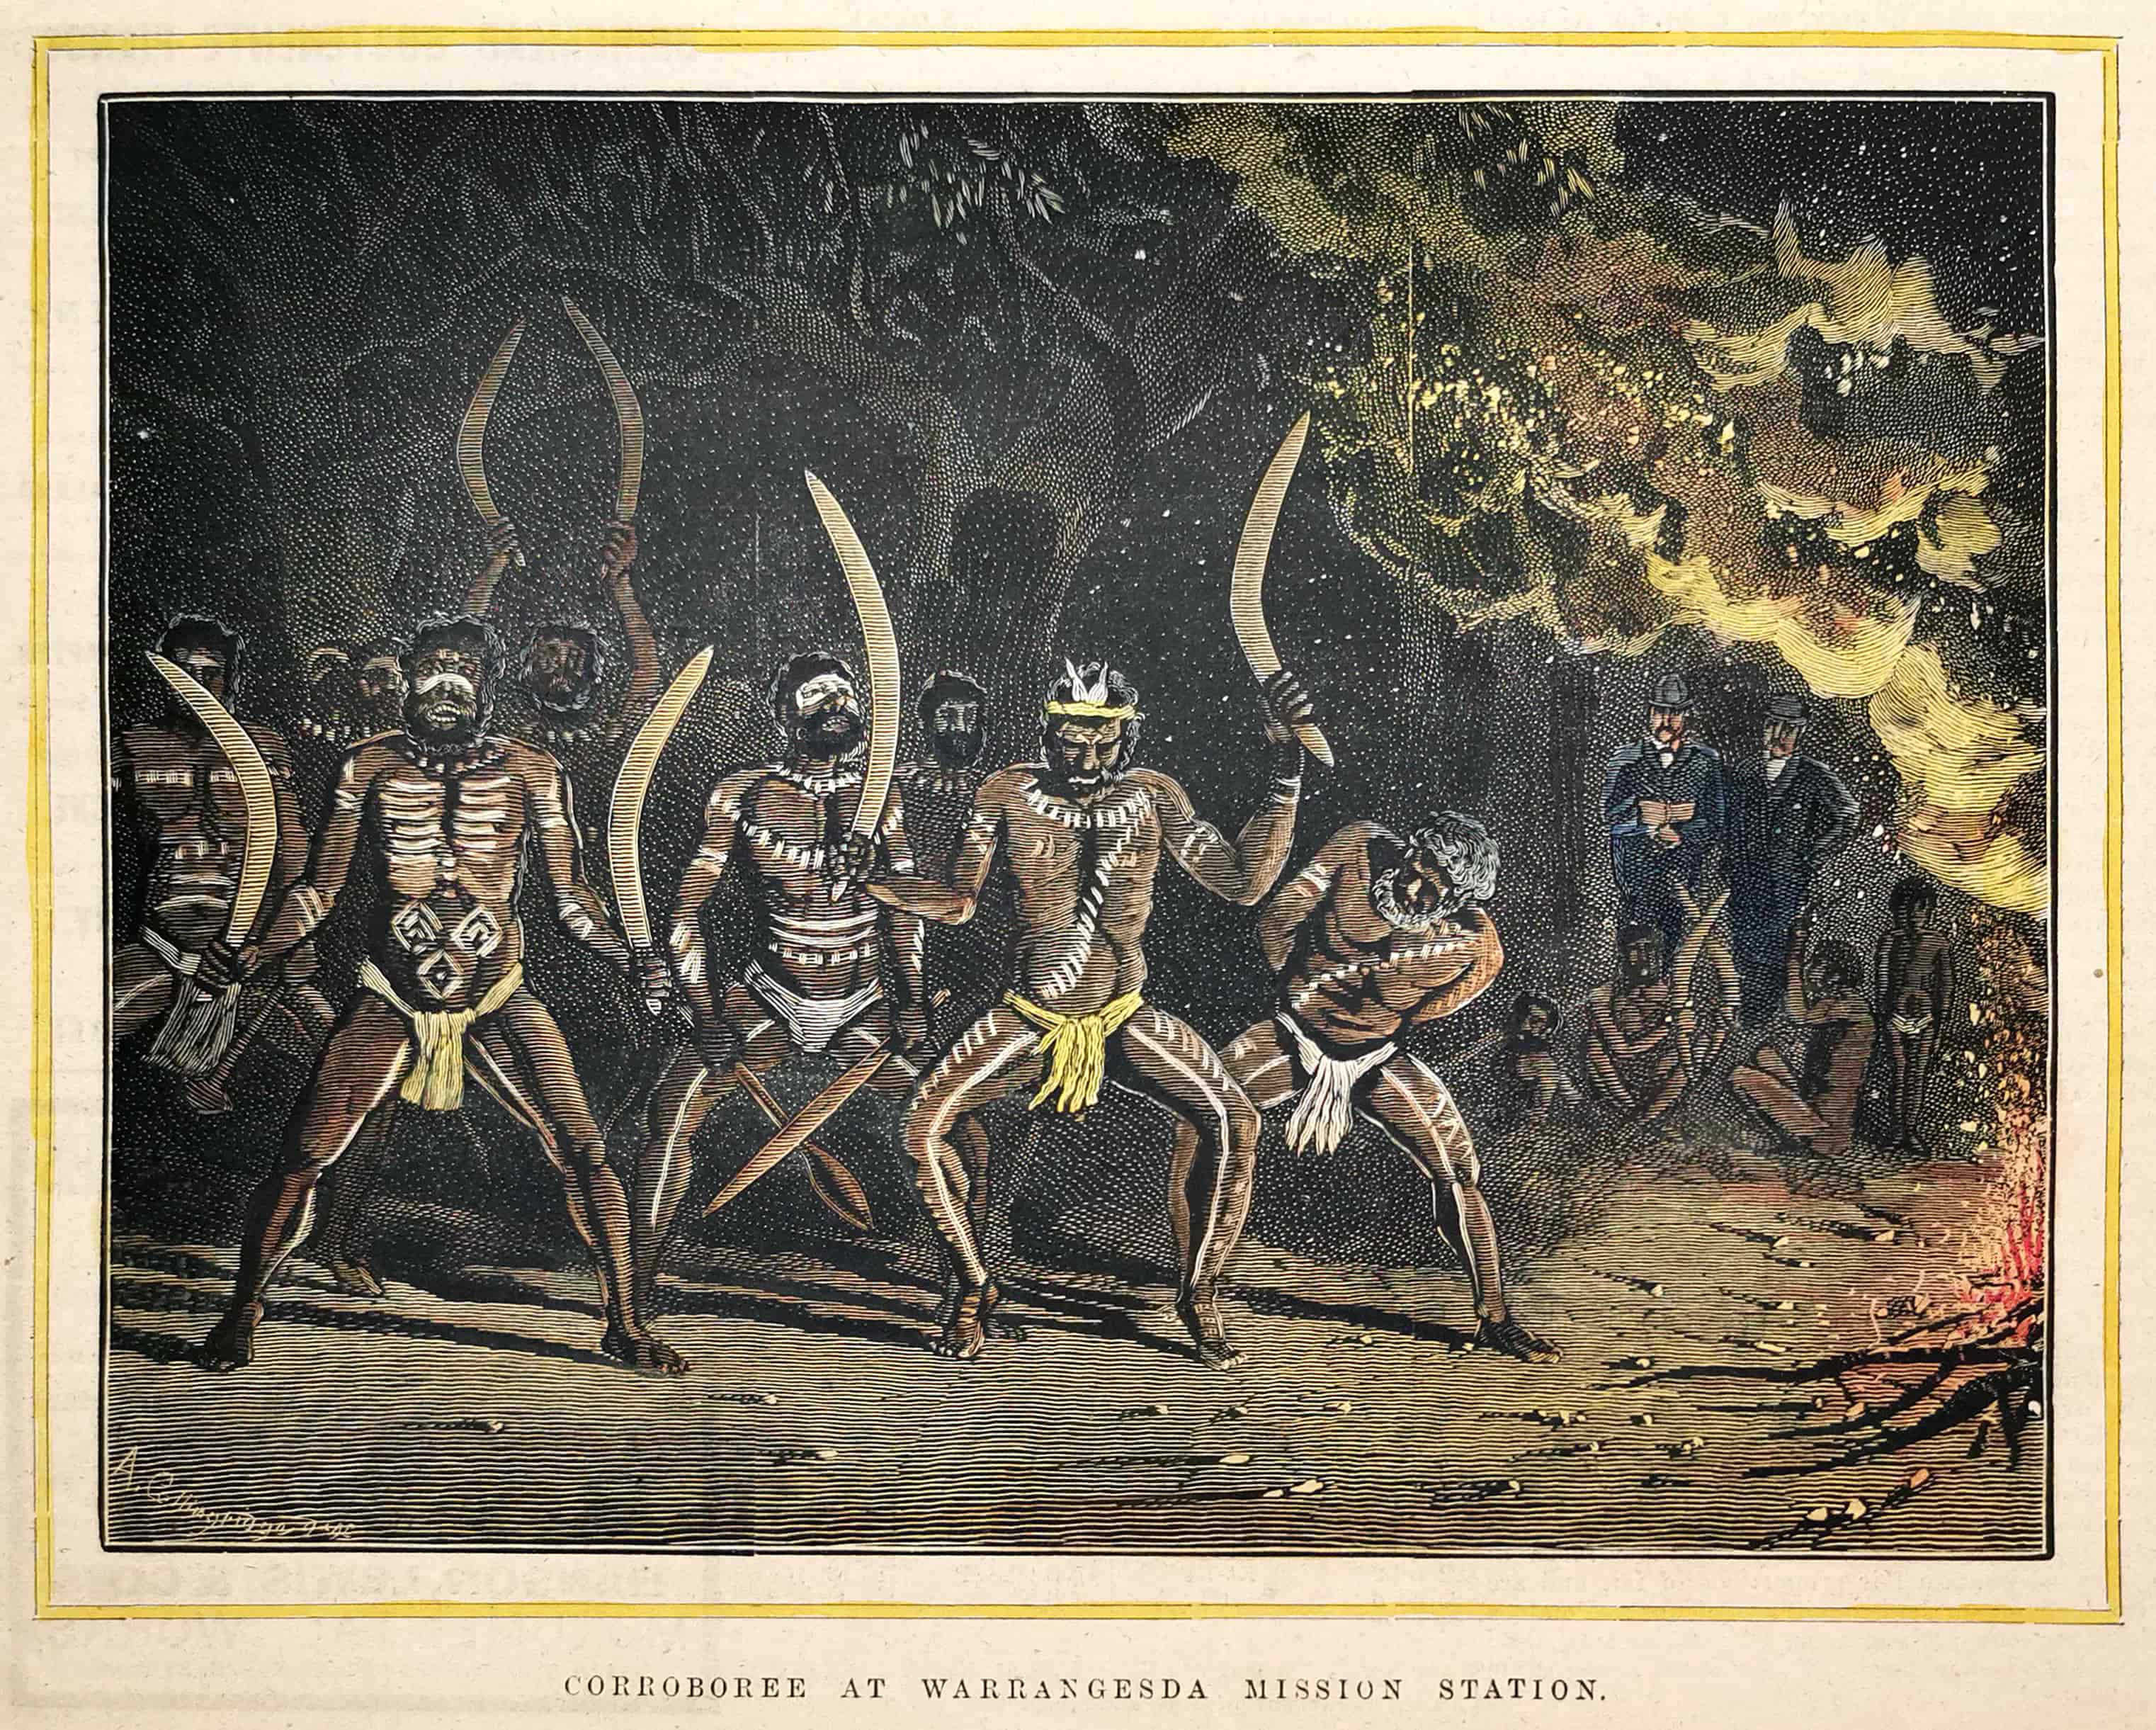 Corroboree at Warrangesda Mission Station. - Antique Print from 1883